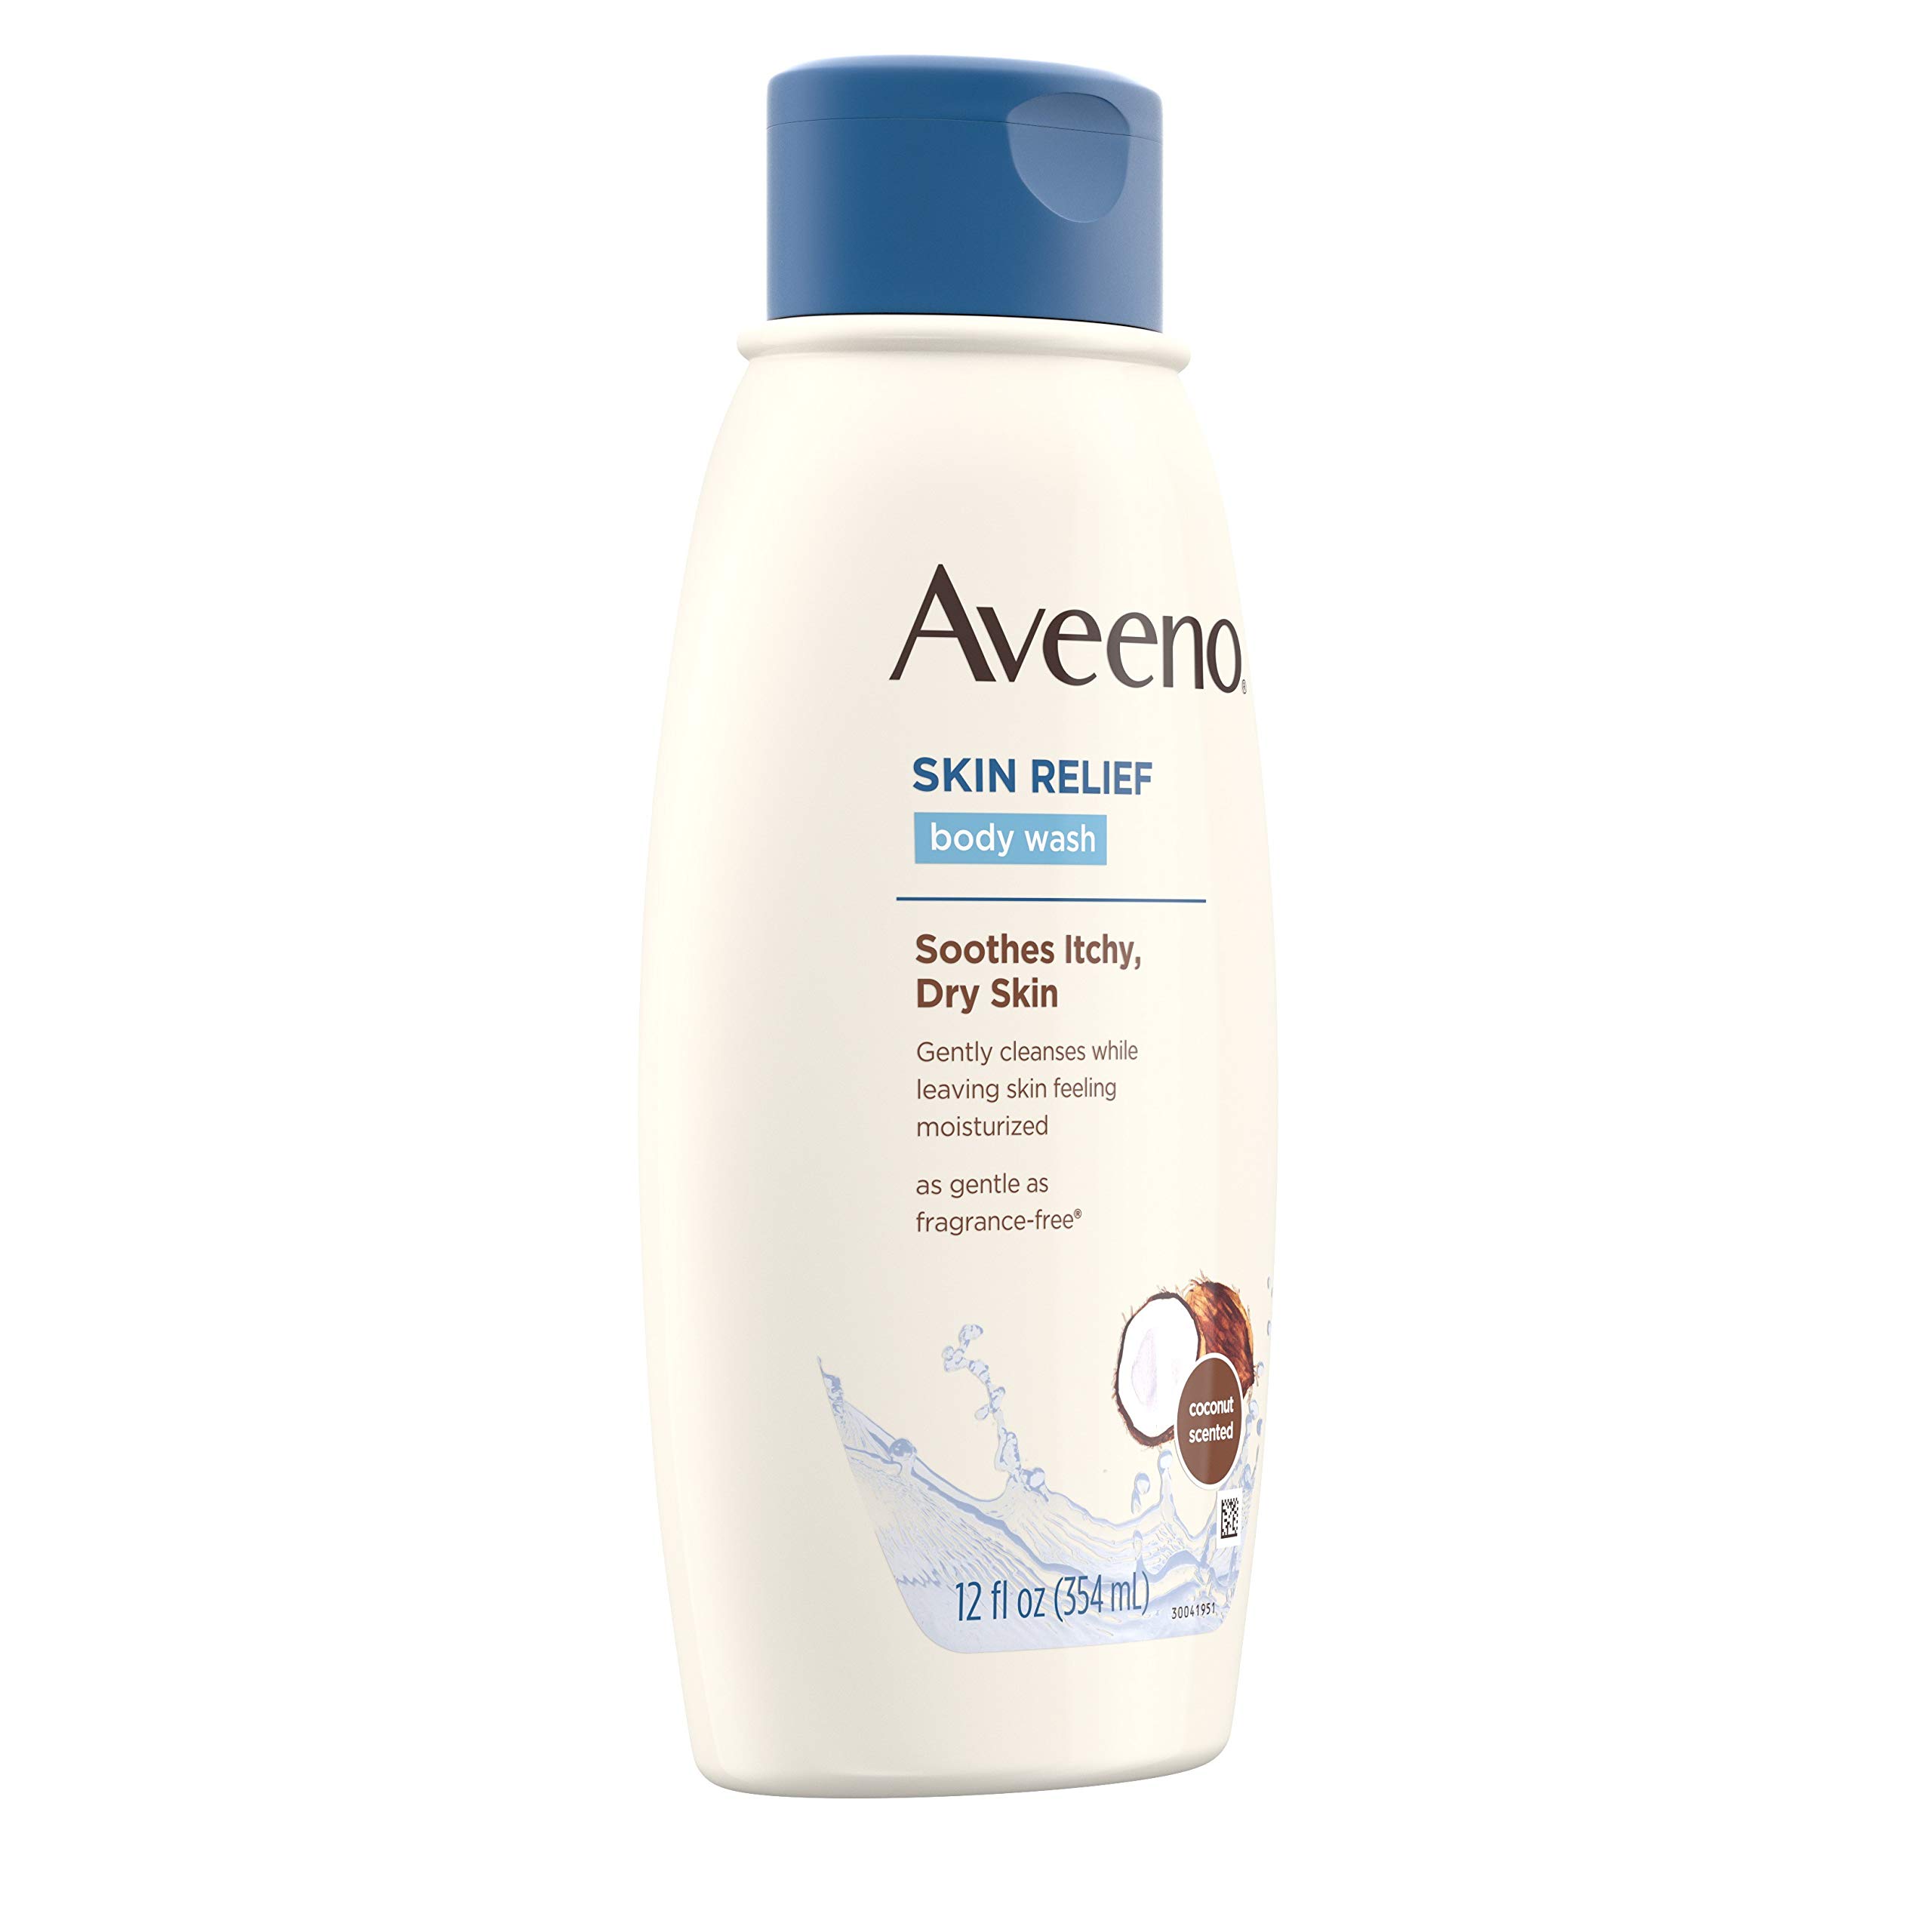 Aveeno Skin Relief Body Wash with Coconut Scent & Soothing Oat, Gentle Soap-Free Body Cleanser for Dry, Itchy & Sensitive Skin, Dye-Free & Allergy-Tested, 12 fl. oz